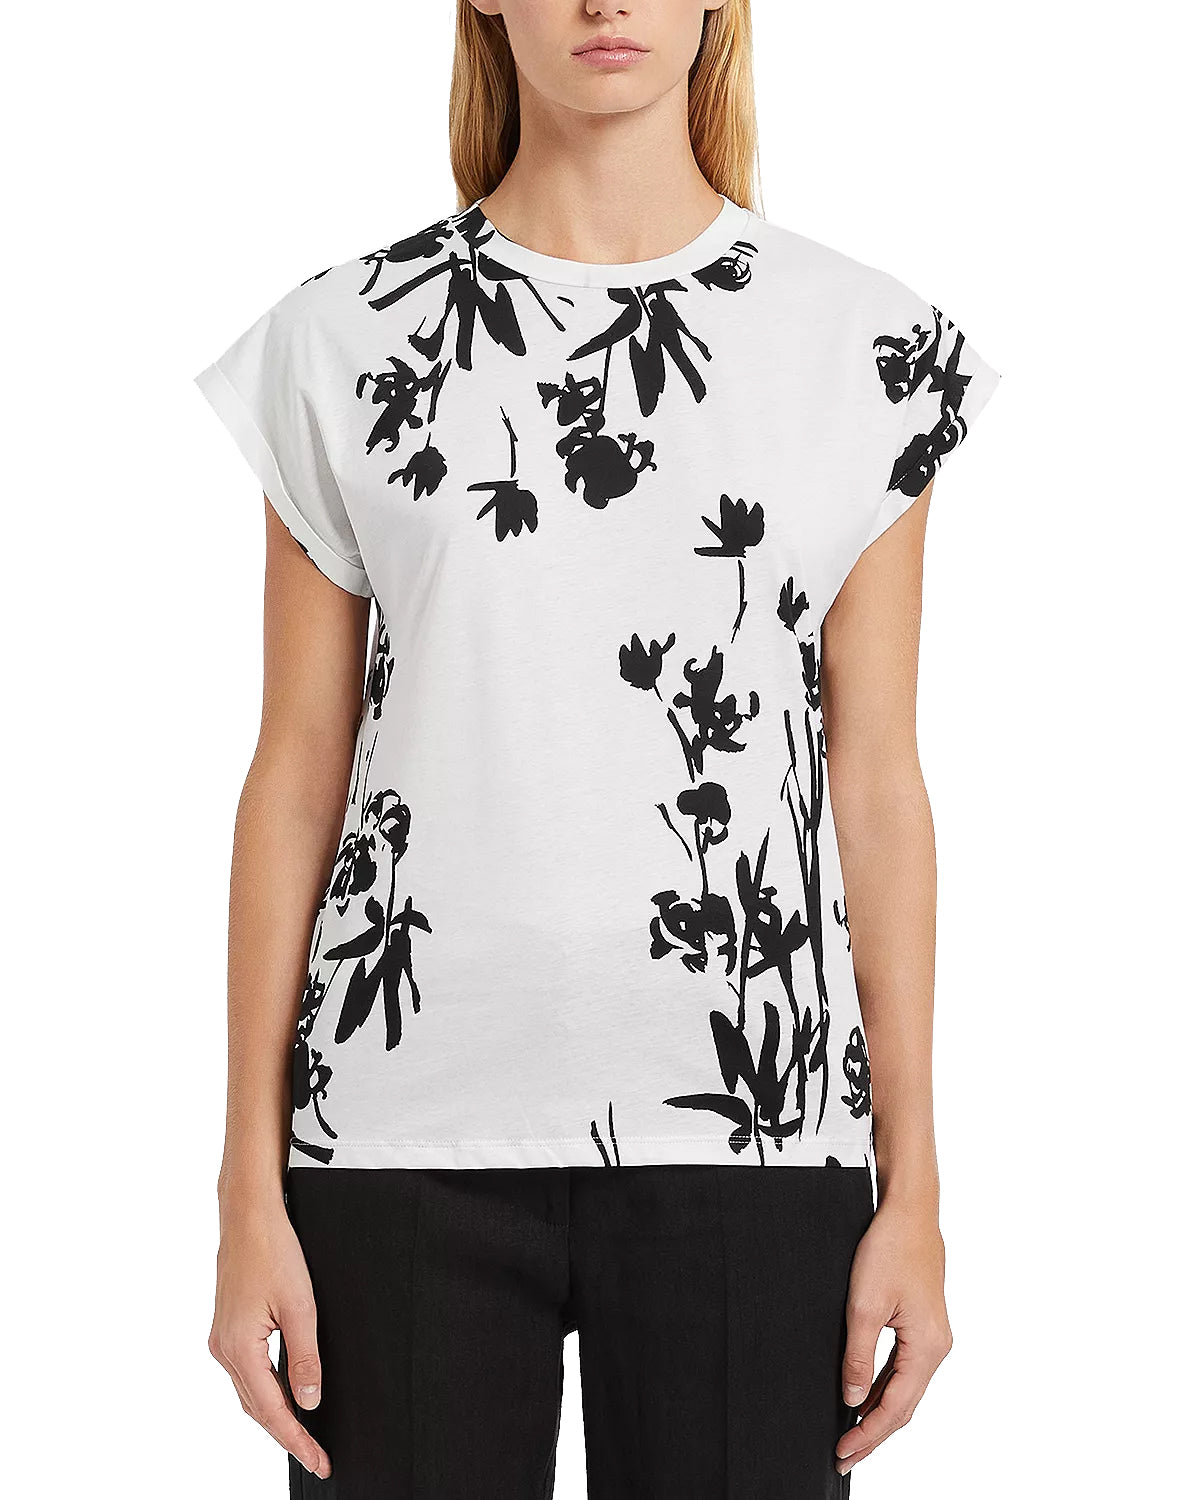 Cotton Cap Sleeve Printed Tee (Ivory Floral)